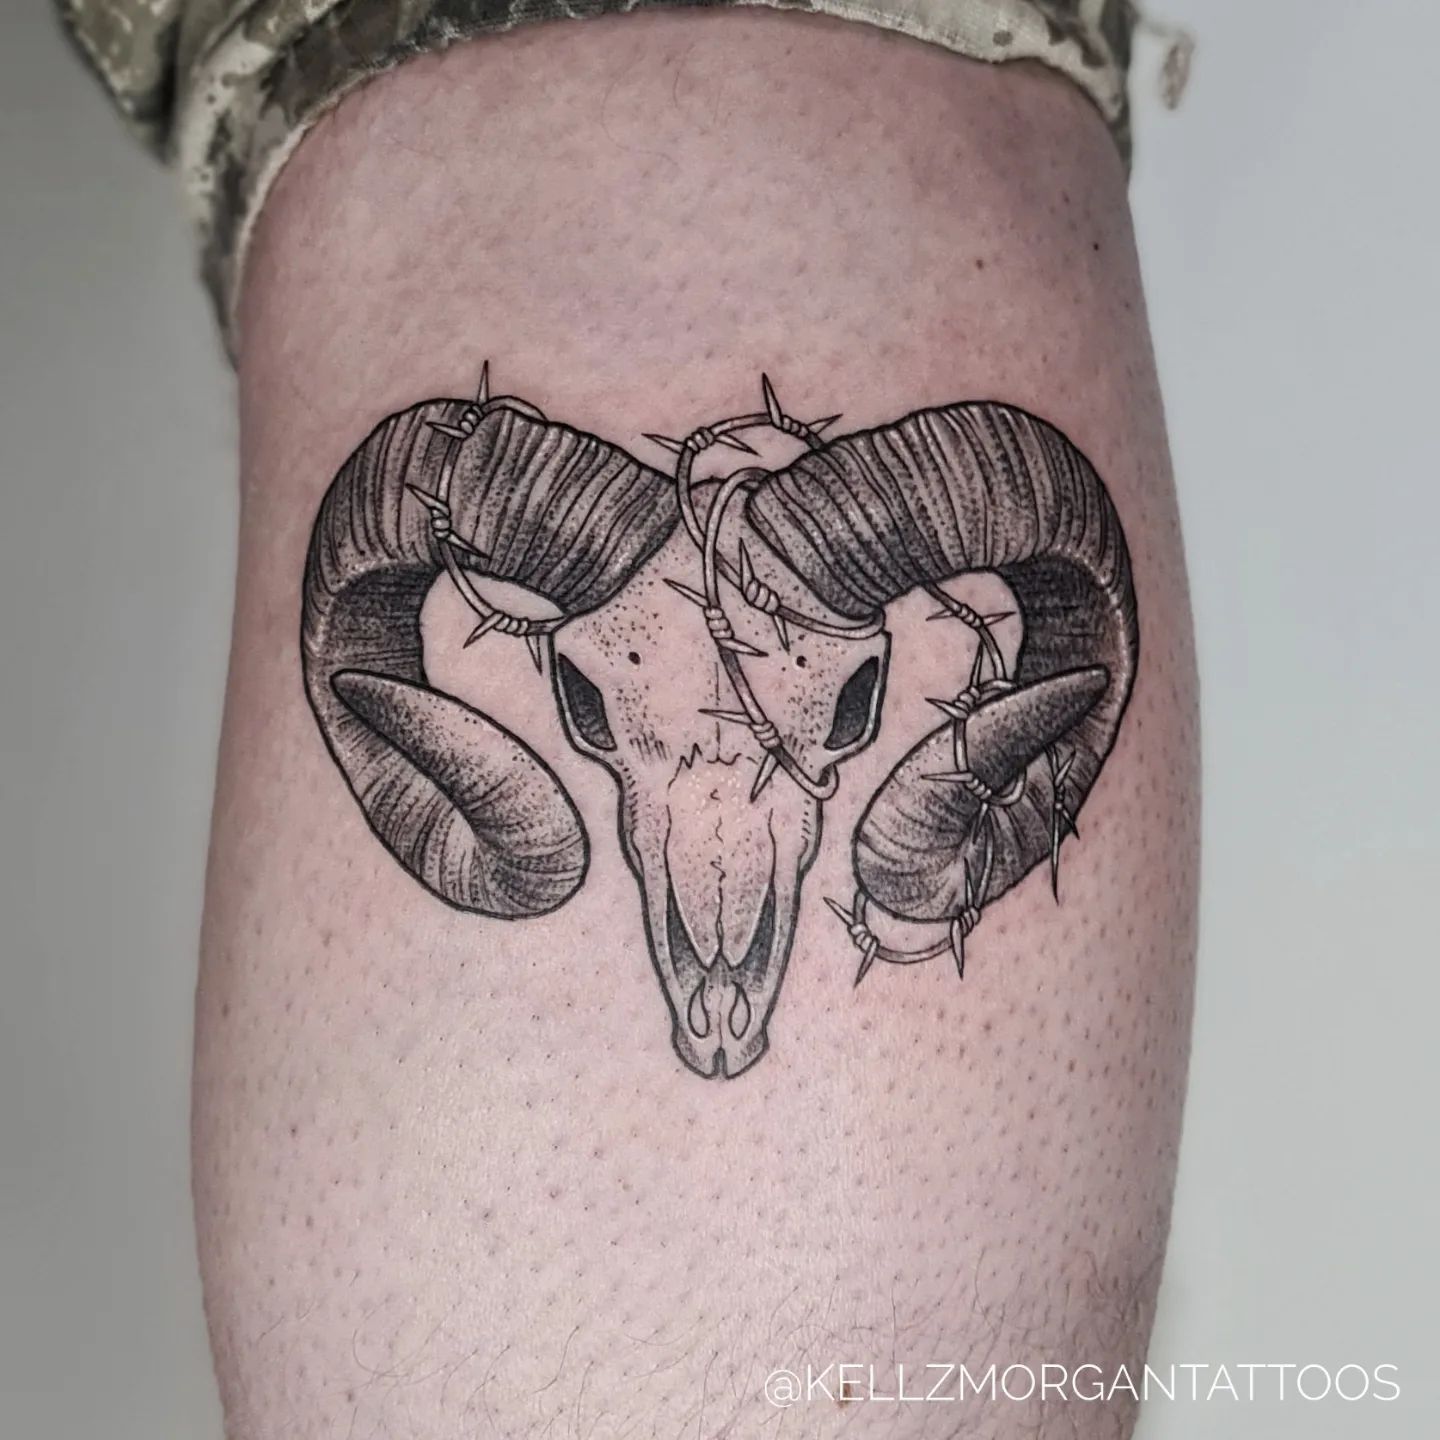 Ram skulls are so cool, aren't they? In many ancient societies, this ram skull is a symbolic figure. It symbolizes determination, renewal and boldness. To take this cool and wild ram skull to a whole different level, adding a barbed wire around its horn is all you need.